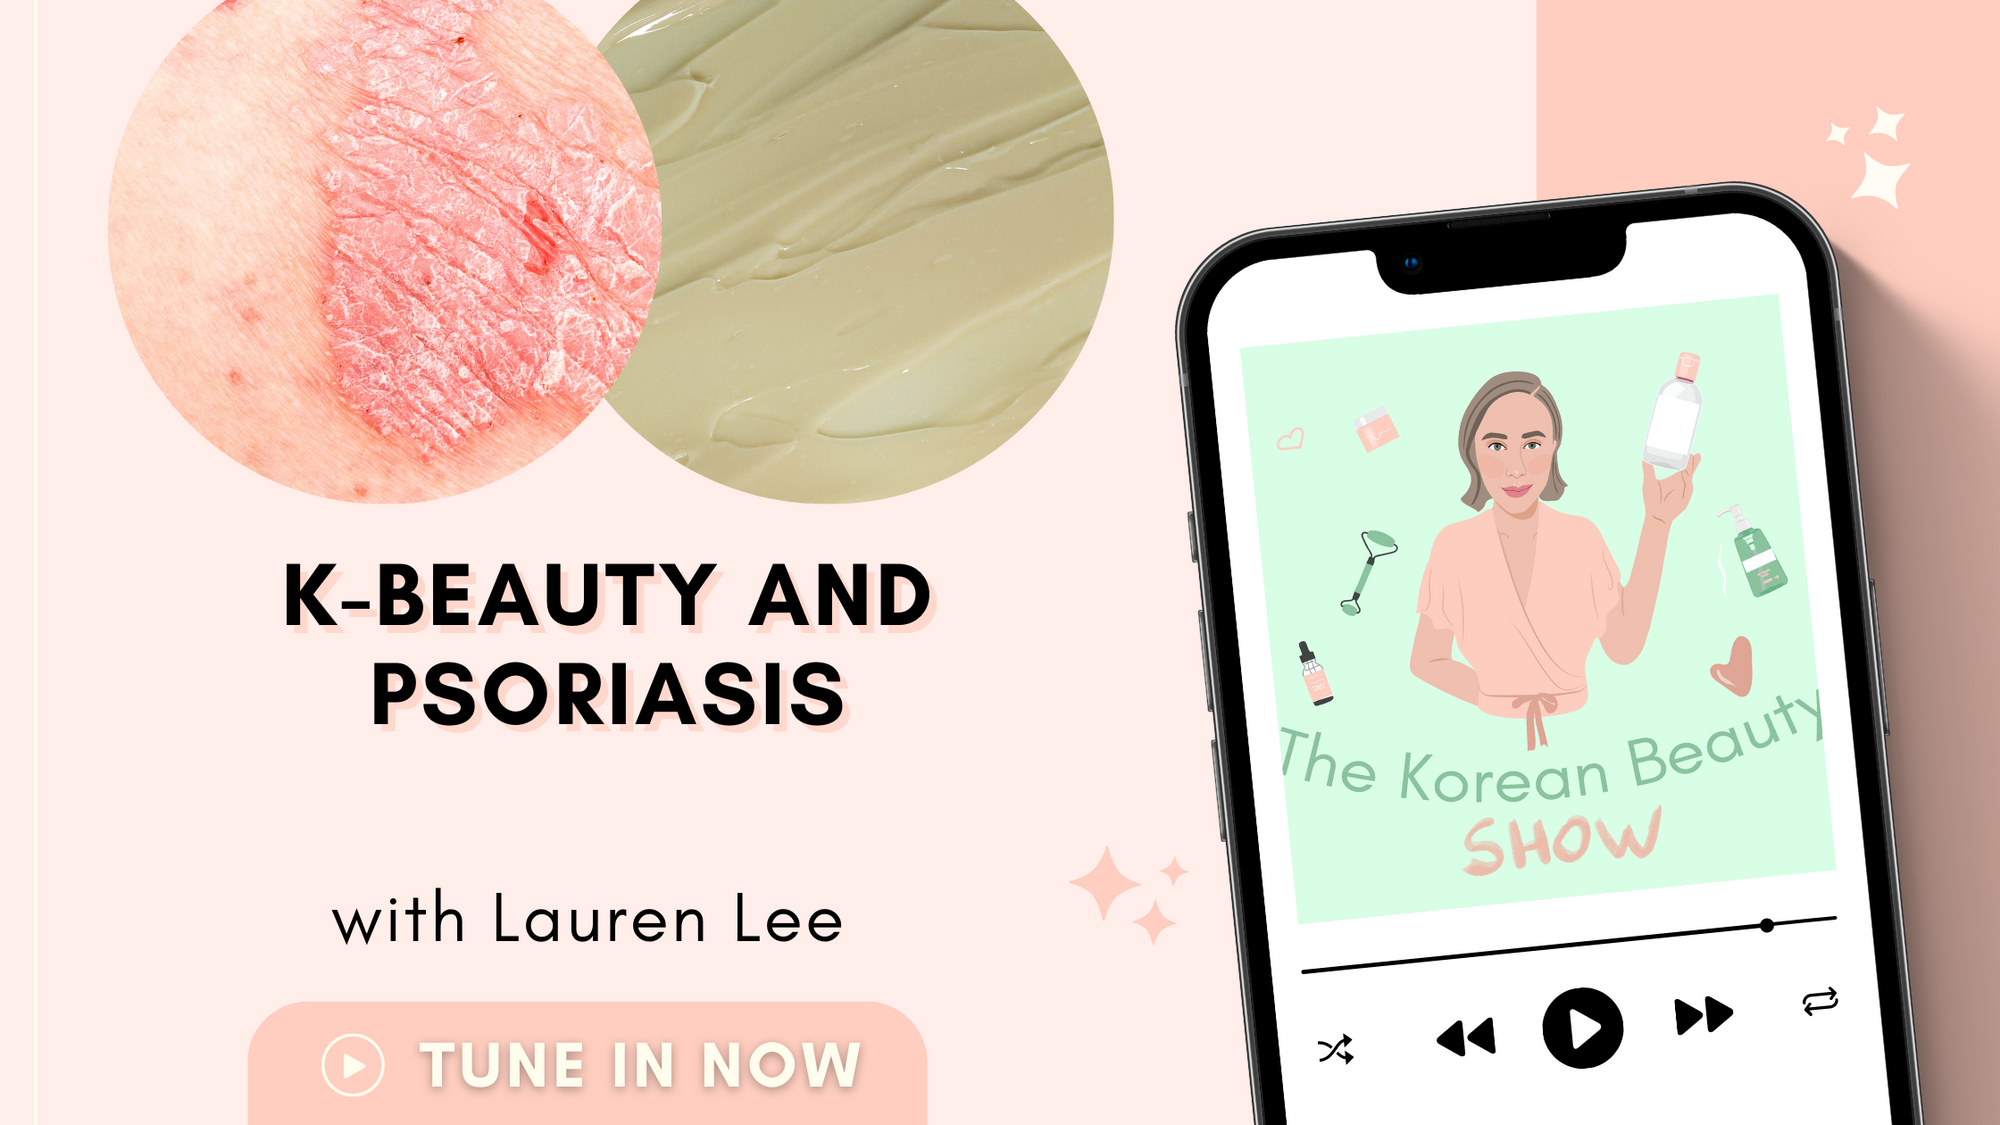 Kbeauty for Psoriasis